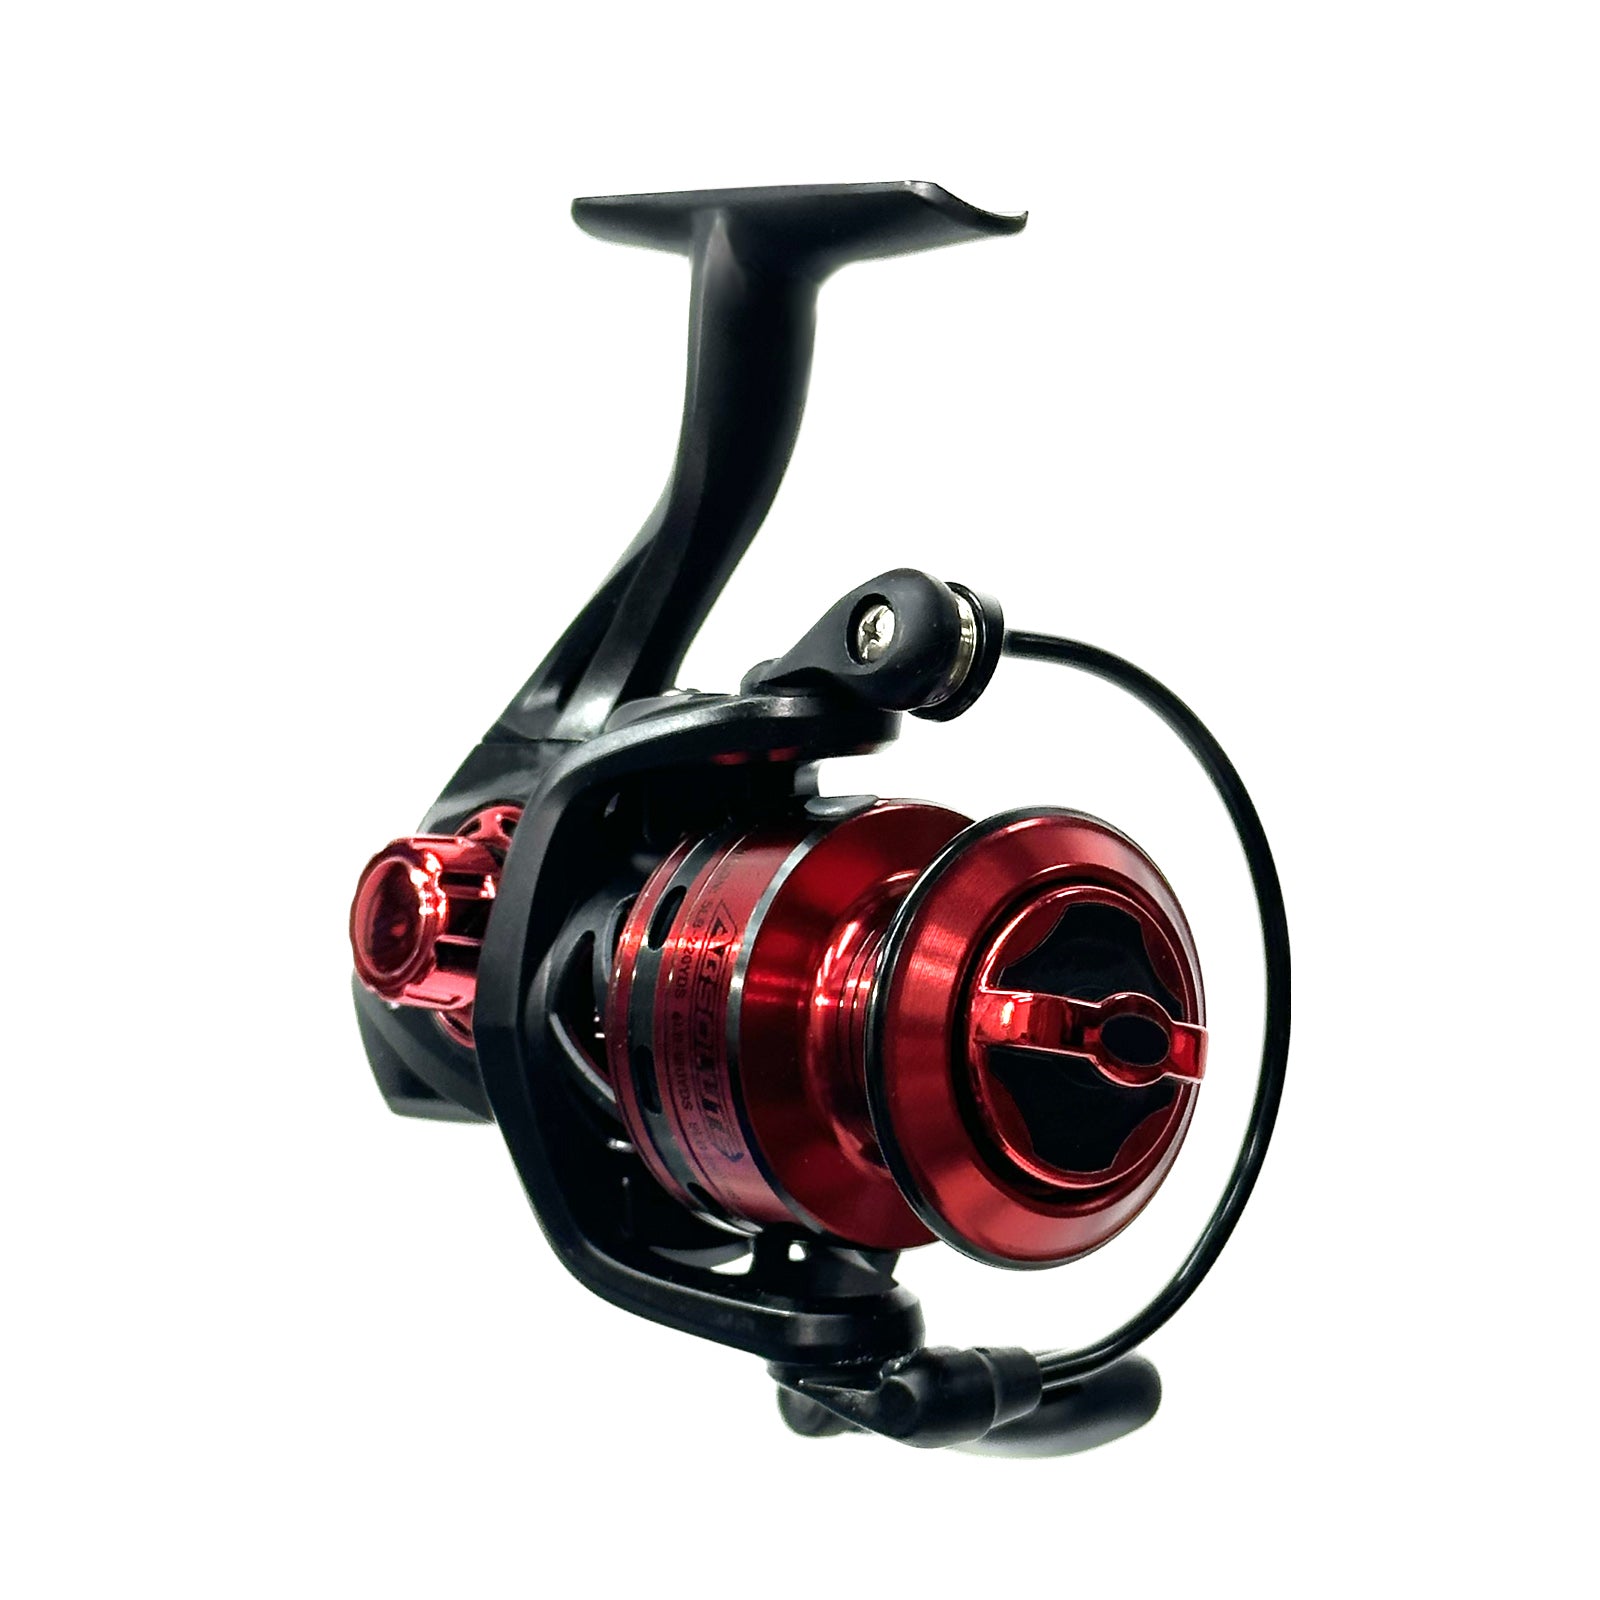 Professional Casting Spincast Fishing Reel Trigger Under-spin Reel  labor-saving Stainless Steel Fishline Wheel Sea Red - AliExpress